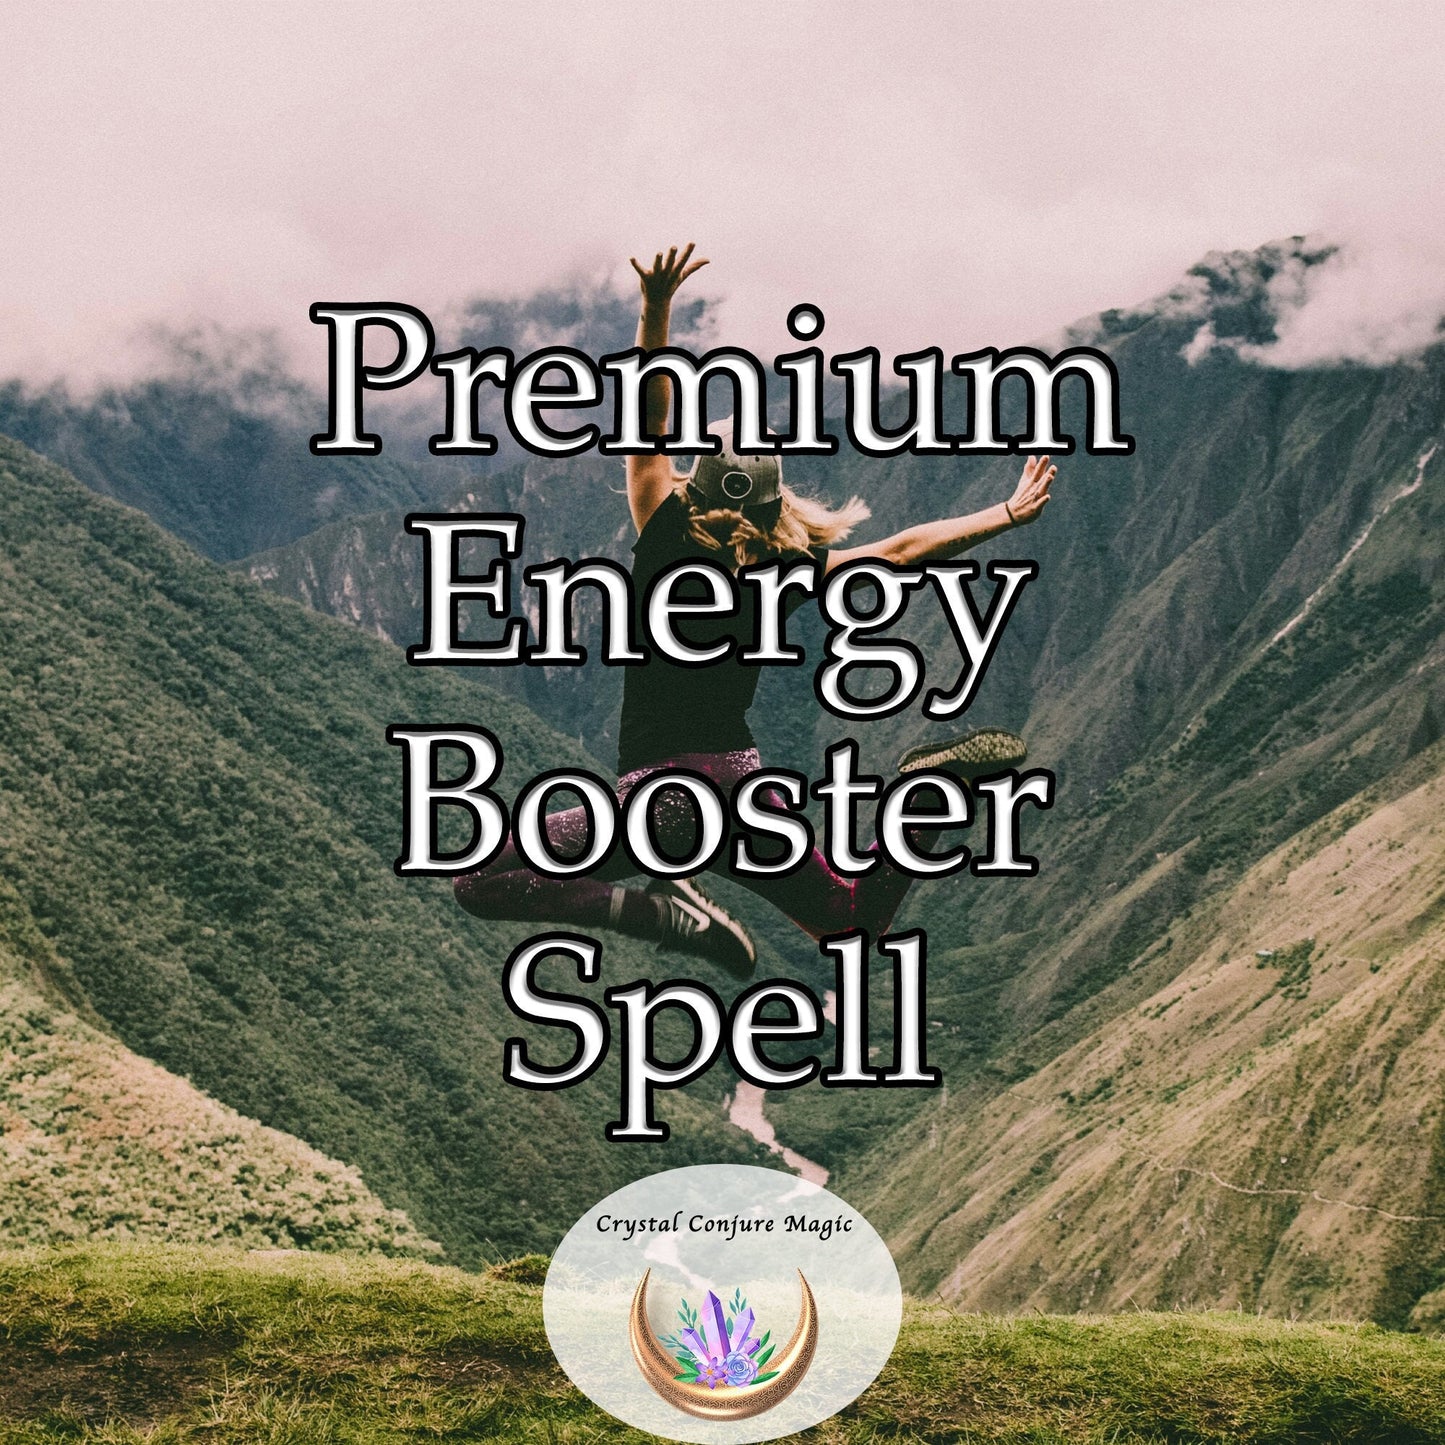 Premium Energy Booster Spell - harness cosmic powers to invigorate your daily life